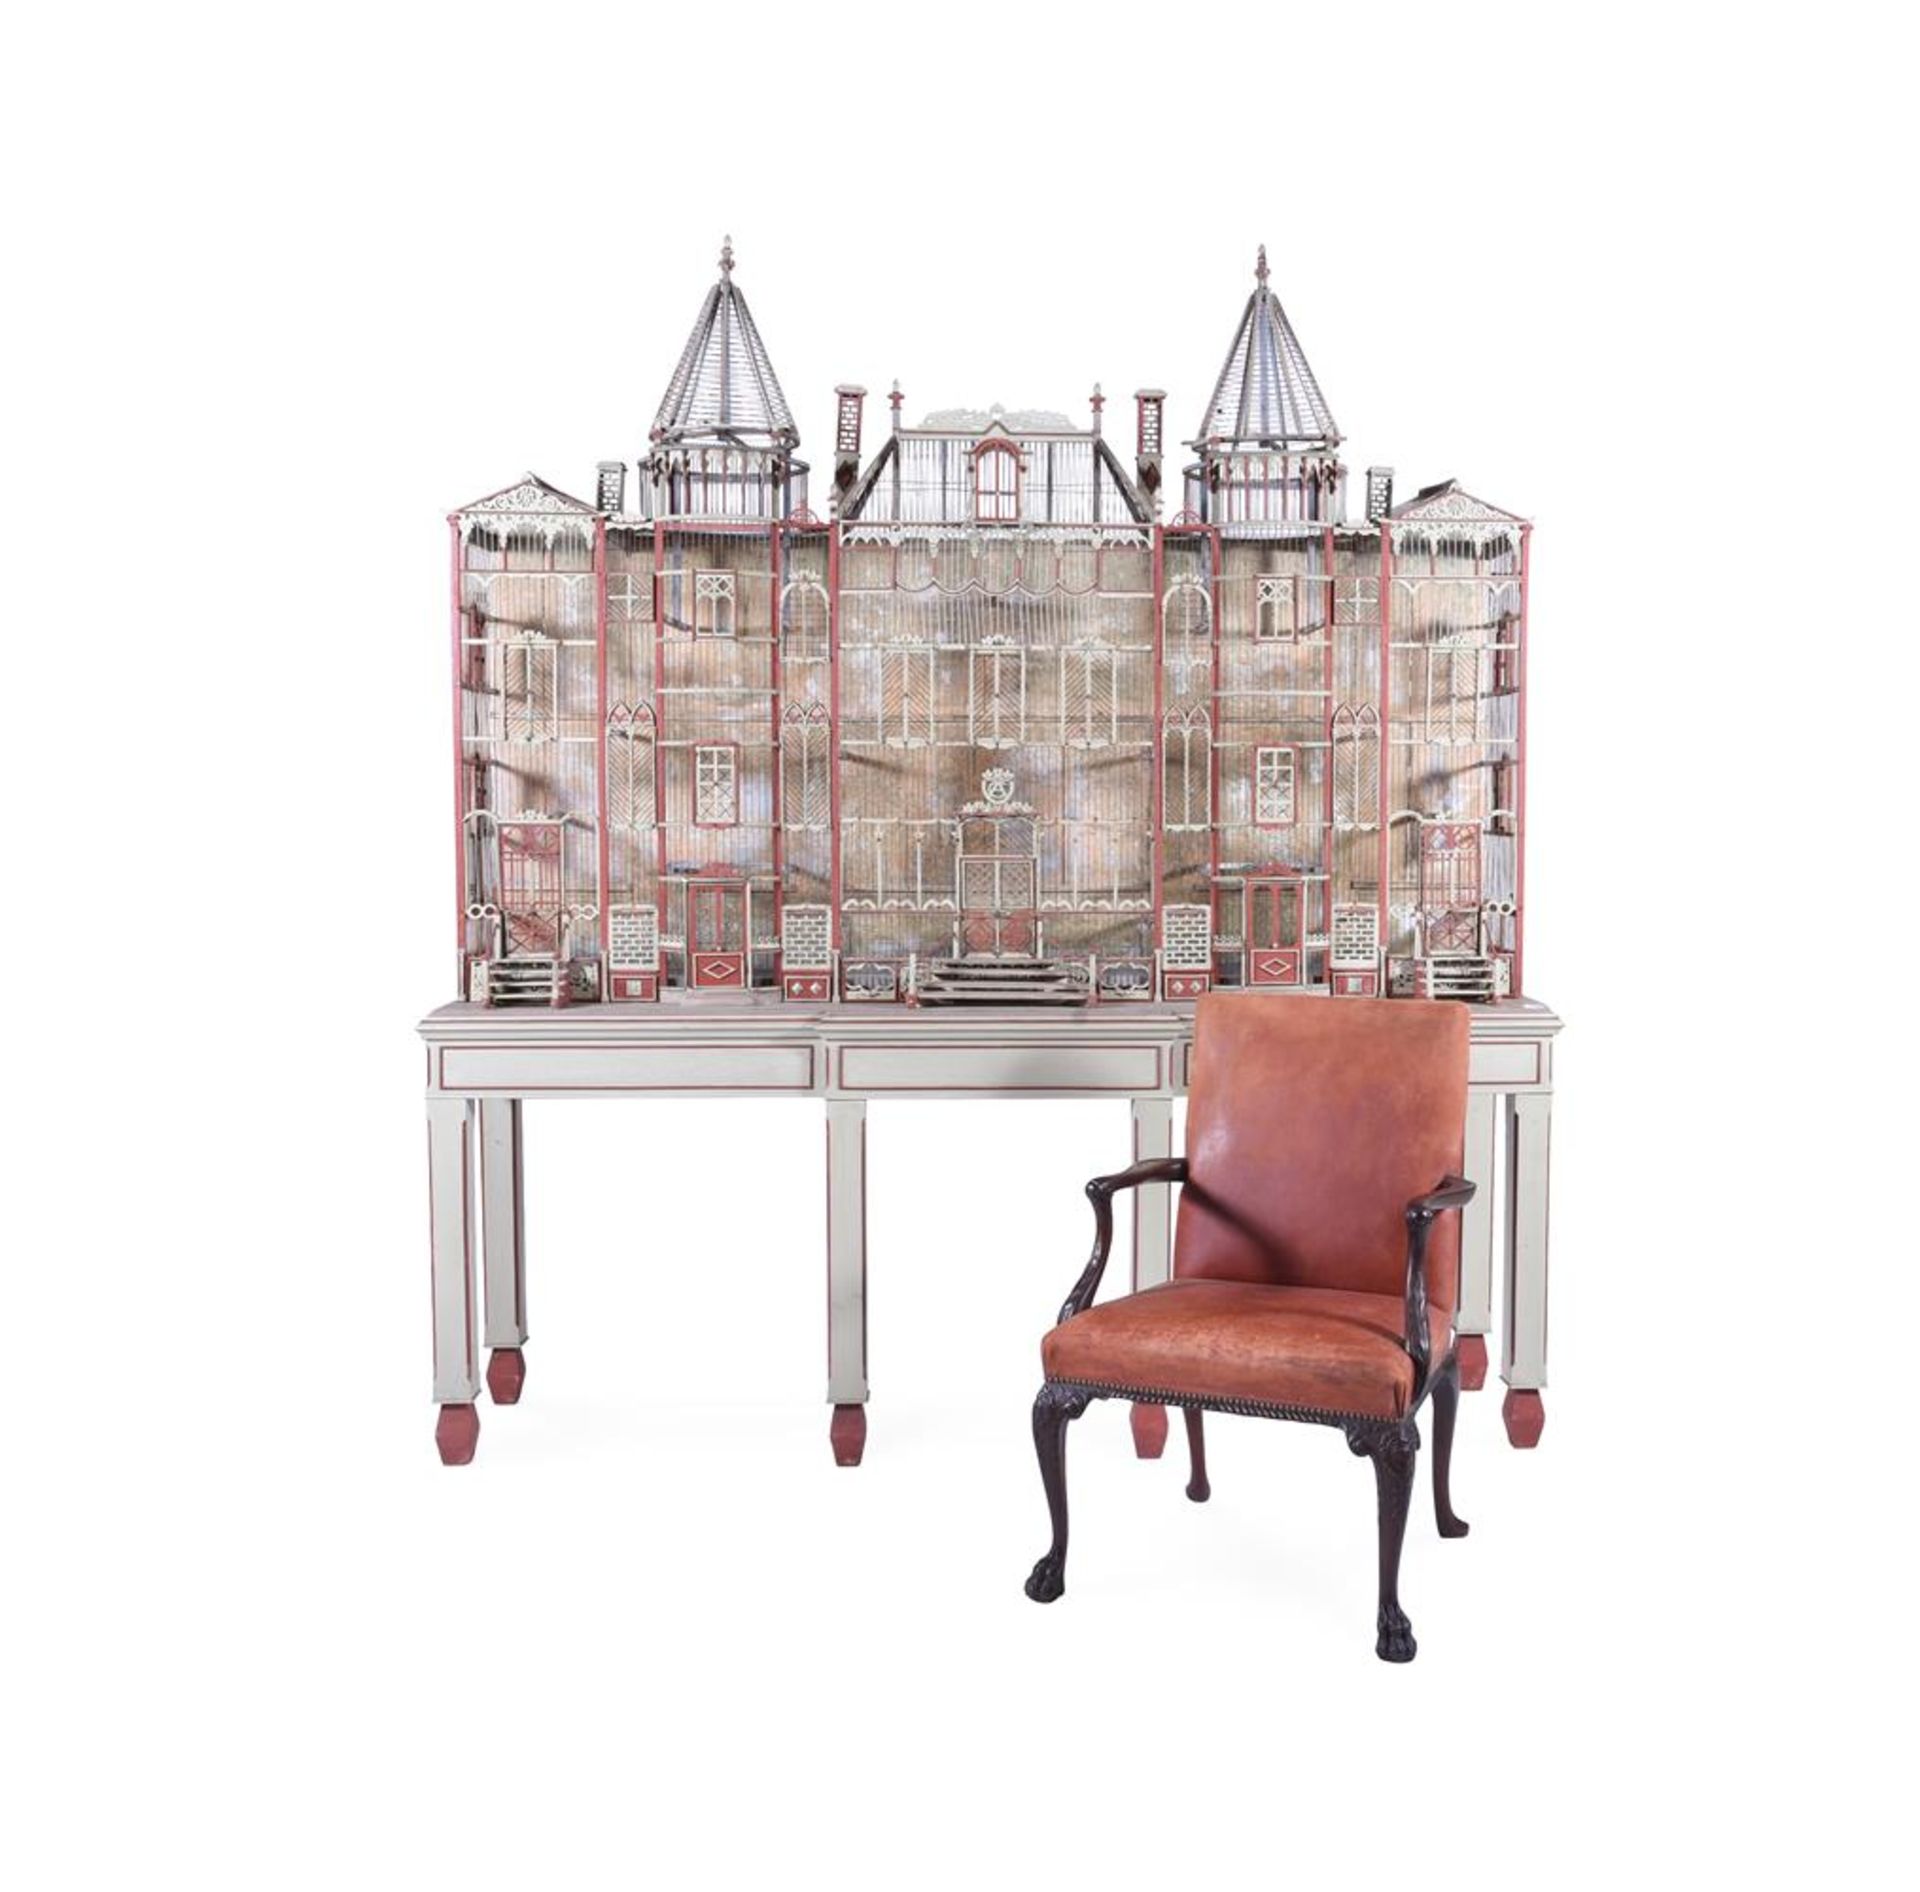 A LARGE PAINTED WOOD AND WIREWORK BIRDCAGE, FIRST HALF 20TH CENTURY - Image 2 of 5